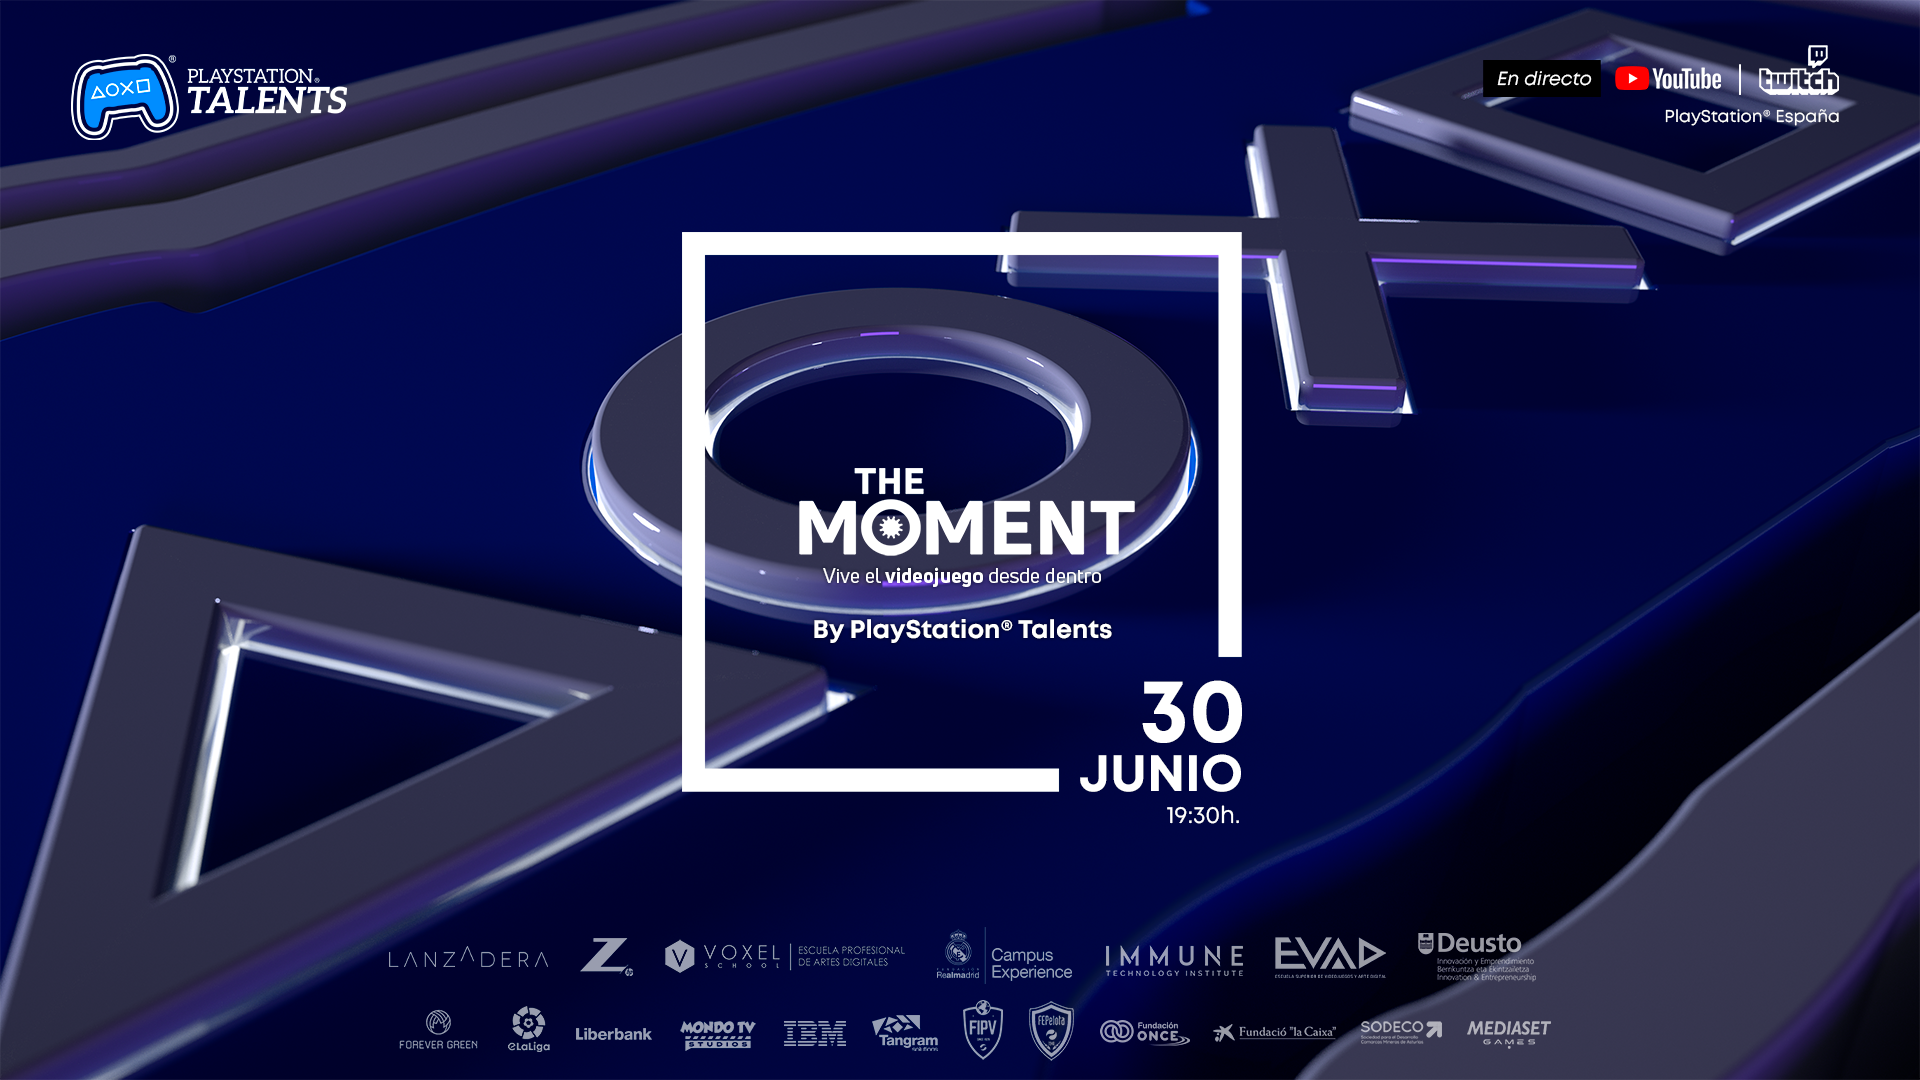 The Moment by PlayStation Talents